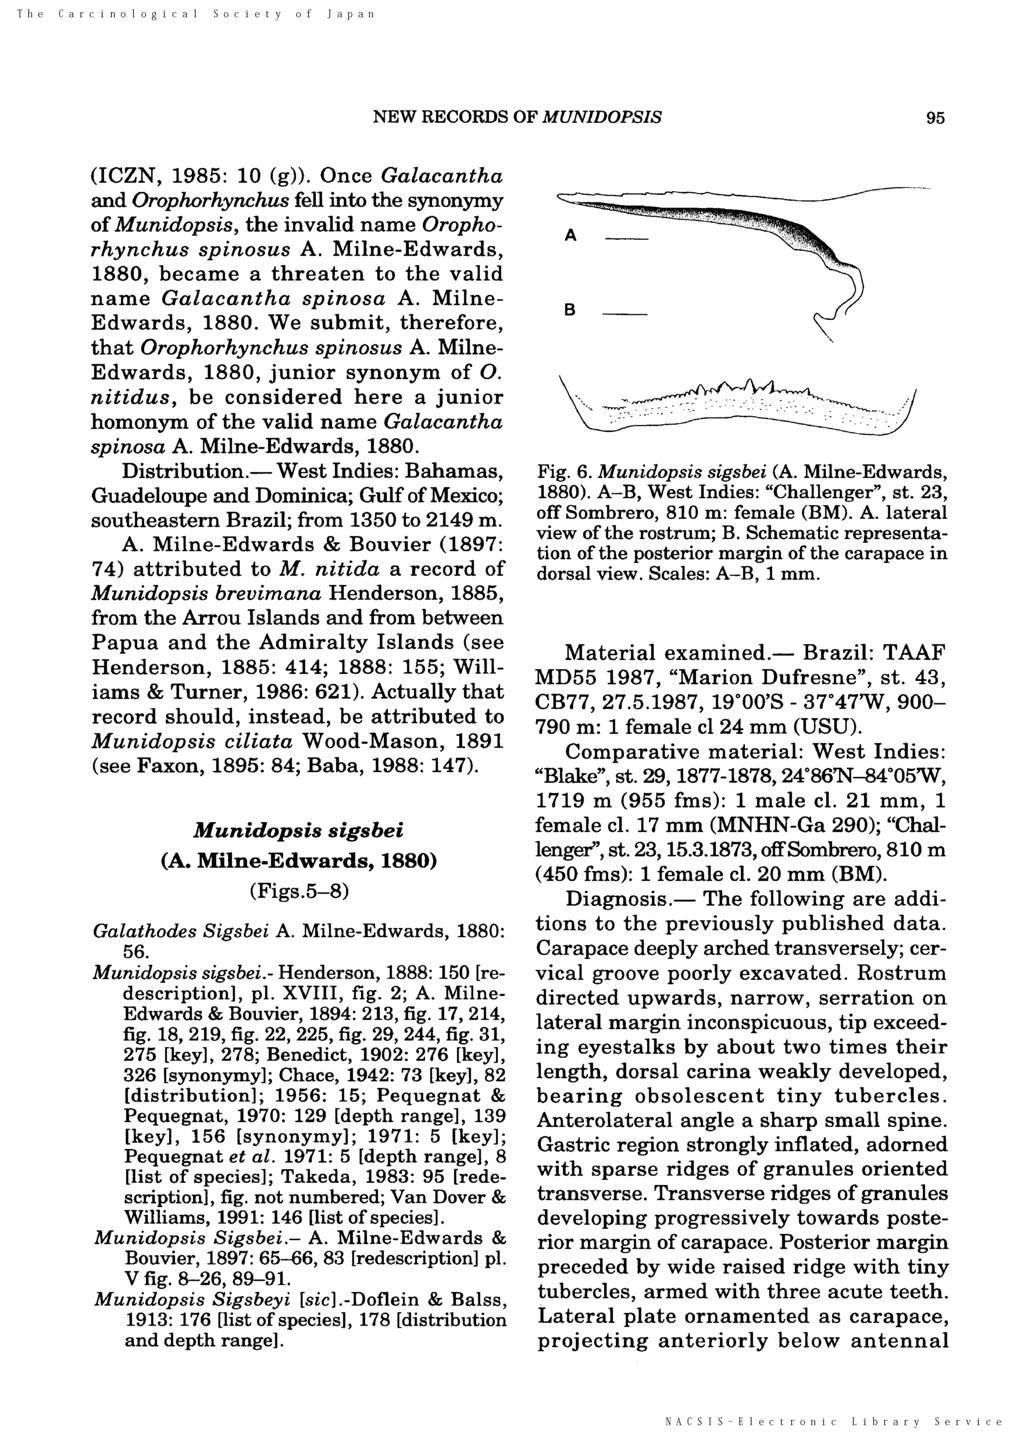 NEW RECORDS MUNIDOPSIS 95 (ICZN, 1985: 10 (g)). Once Galacantha and Orophorhynchus fell into the synonymy of Munidopsis, the invalid name Orophorhynchus spinosus A.